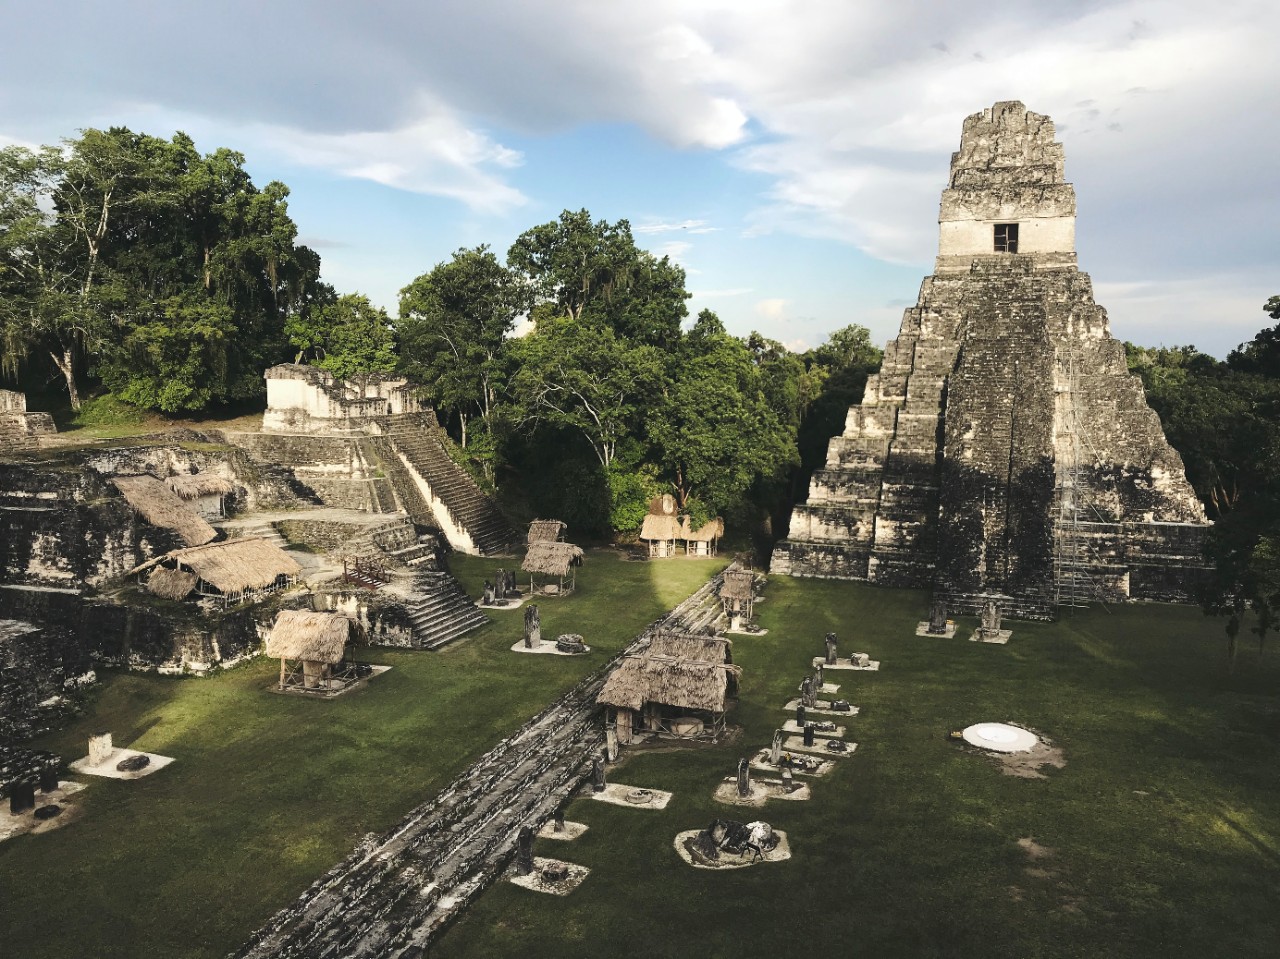 A towering temple rises from the rainforest at Tikal.